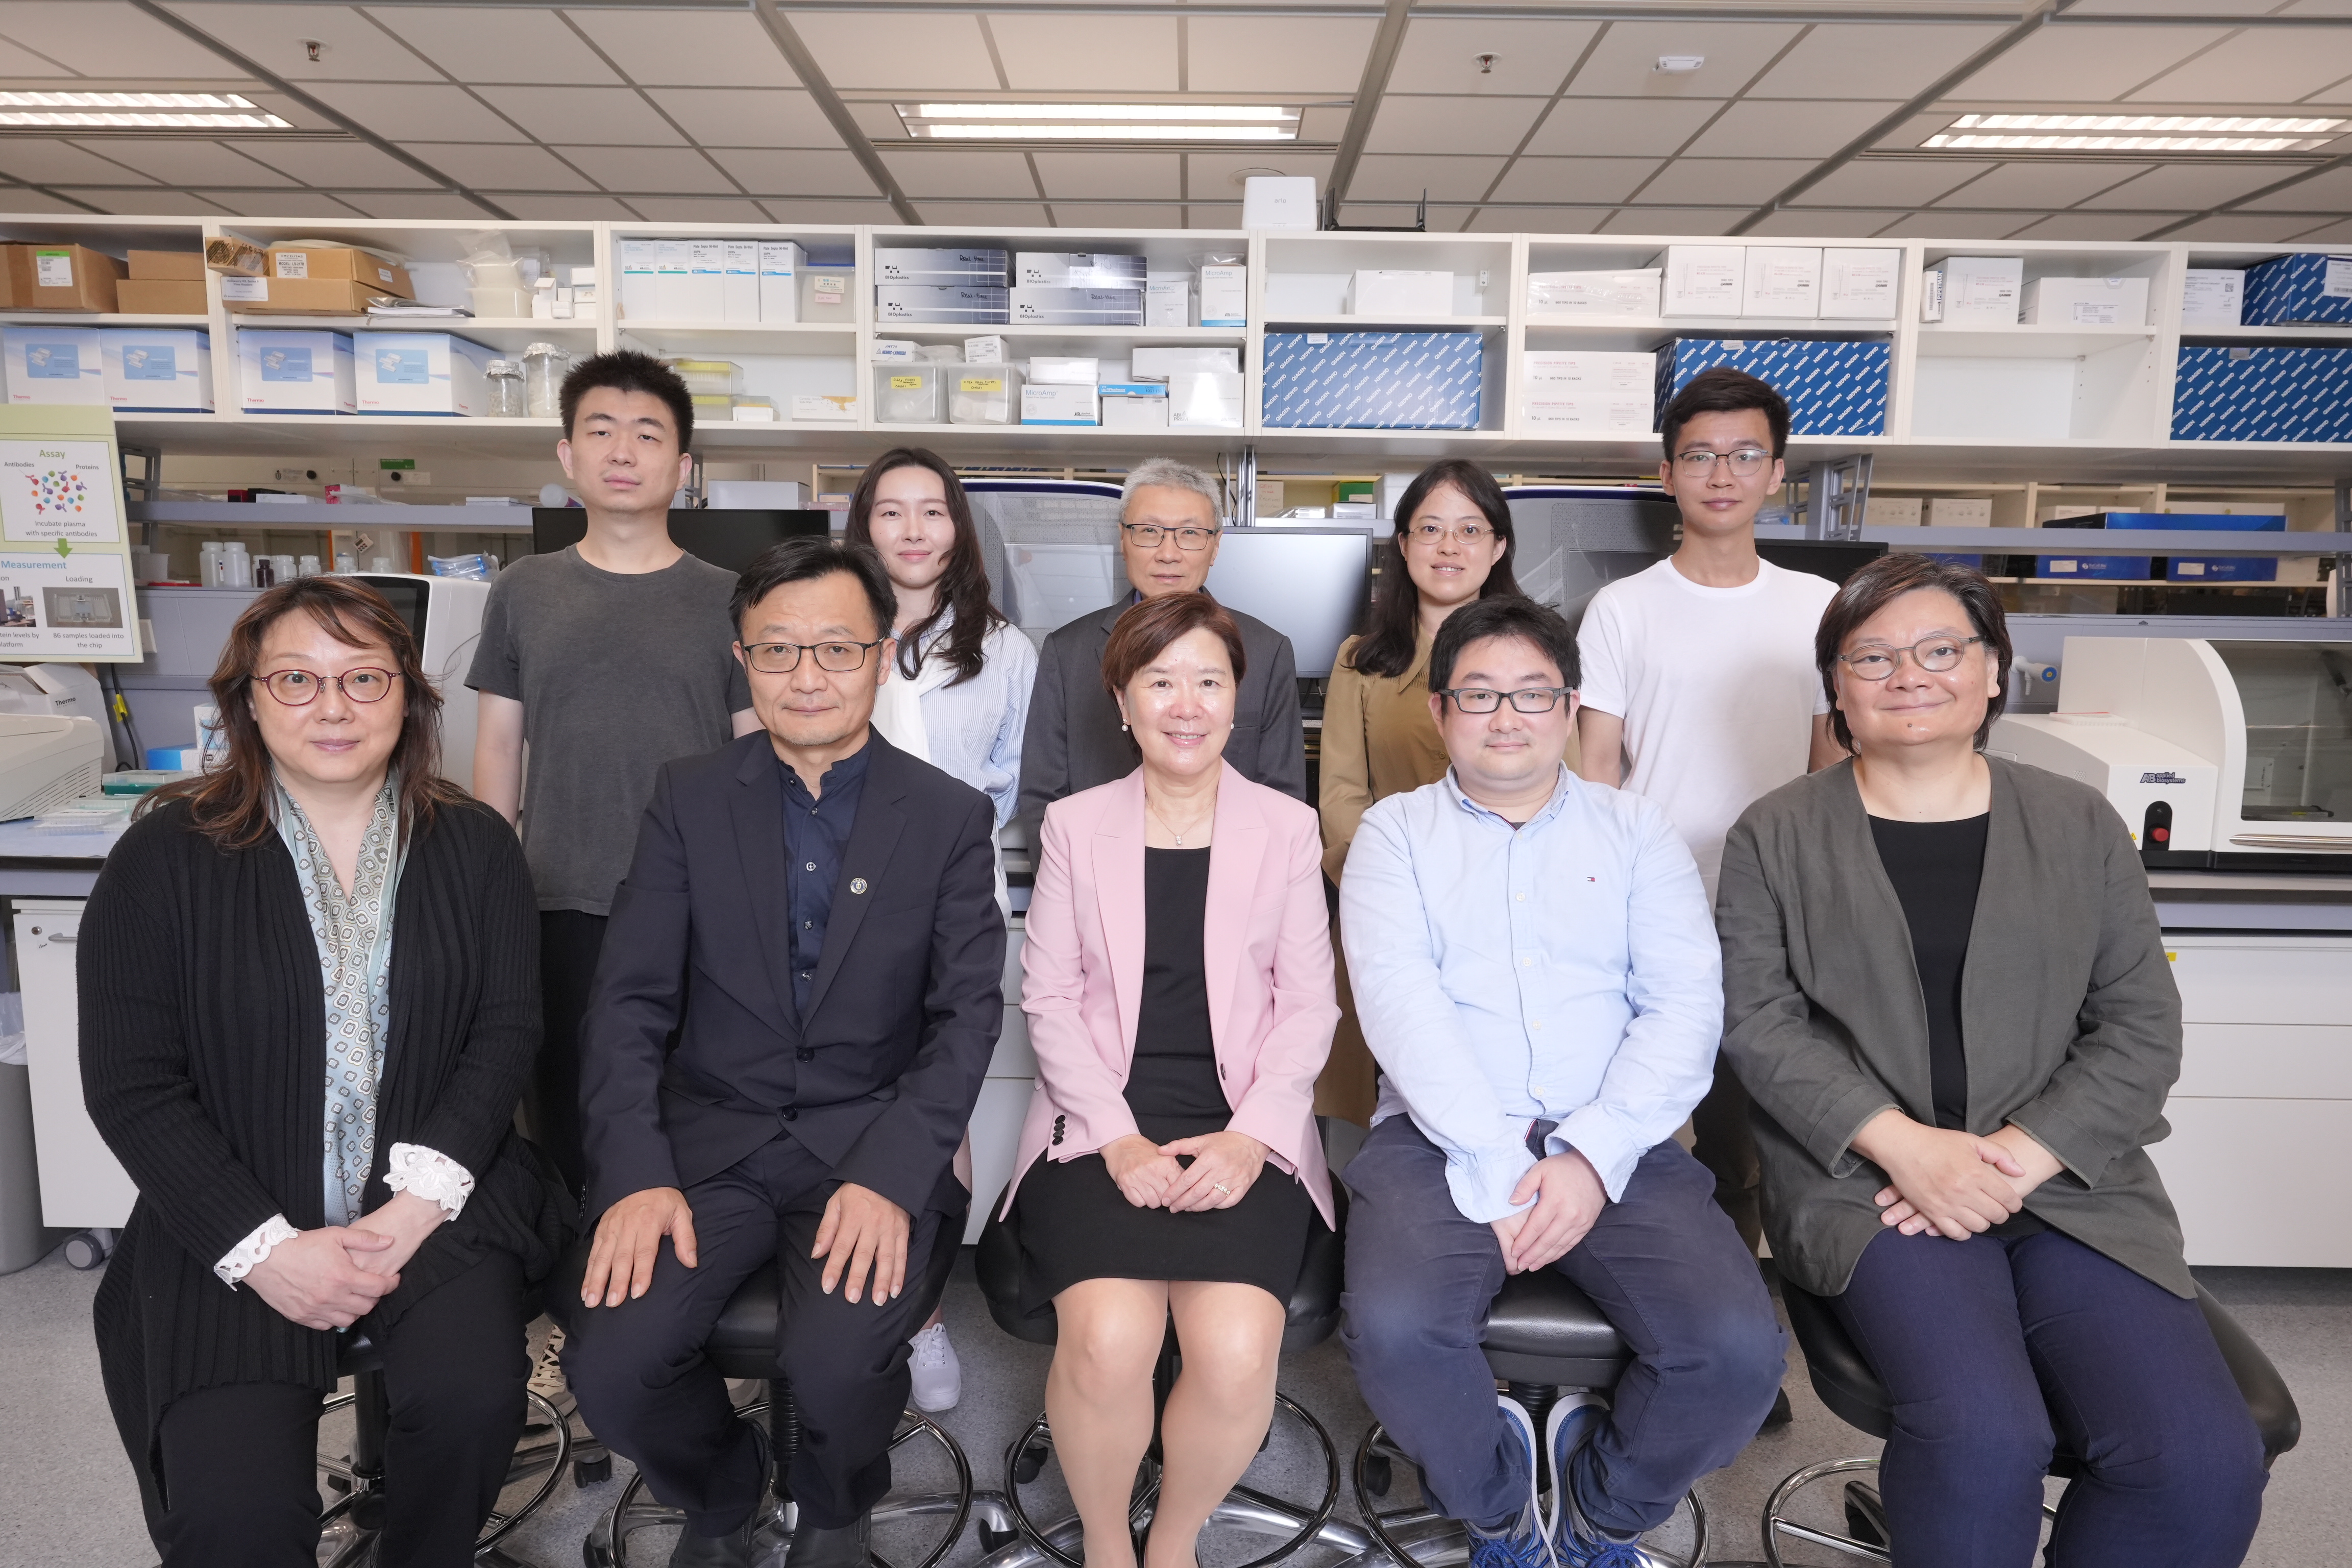 HKUST President Prof. Nancy IP (center, front row), Director of HKUST’s Big Data Institute Prof. CHEN Lei (second left, front row), HKUST Division of Life Science Research Professor Prof. Amy FU (first right, front row), Hong Kong Center for Neurodegenerative Diseases (HKCeND) Chief Scientific Officer Dr. Fanny IP (first left, front row) and the first author of the research paper Prof. Fred ZHOU Xiaopu (second right, front row) take a group photo with other members of the research team.